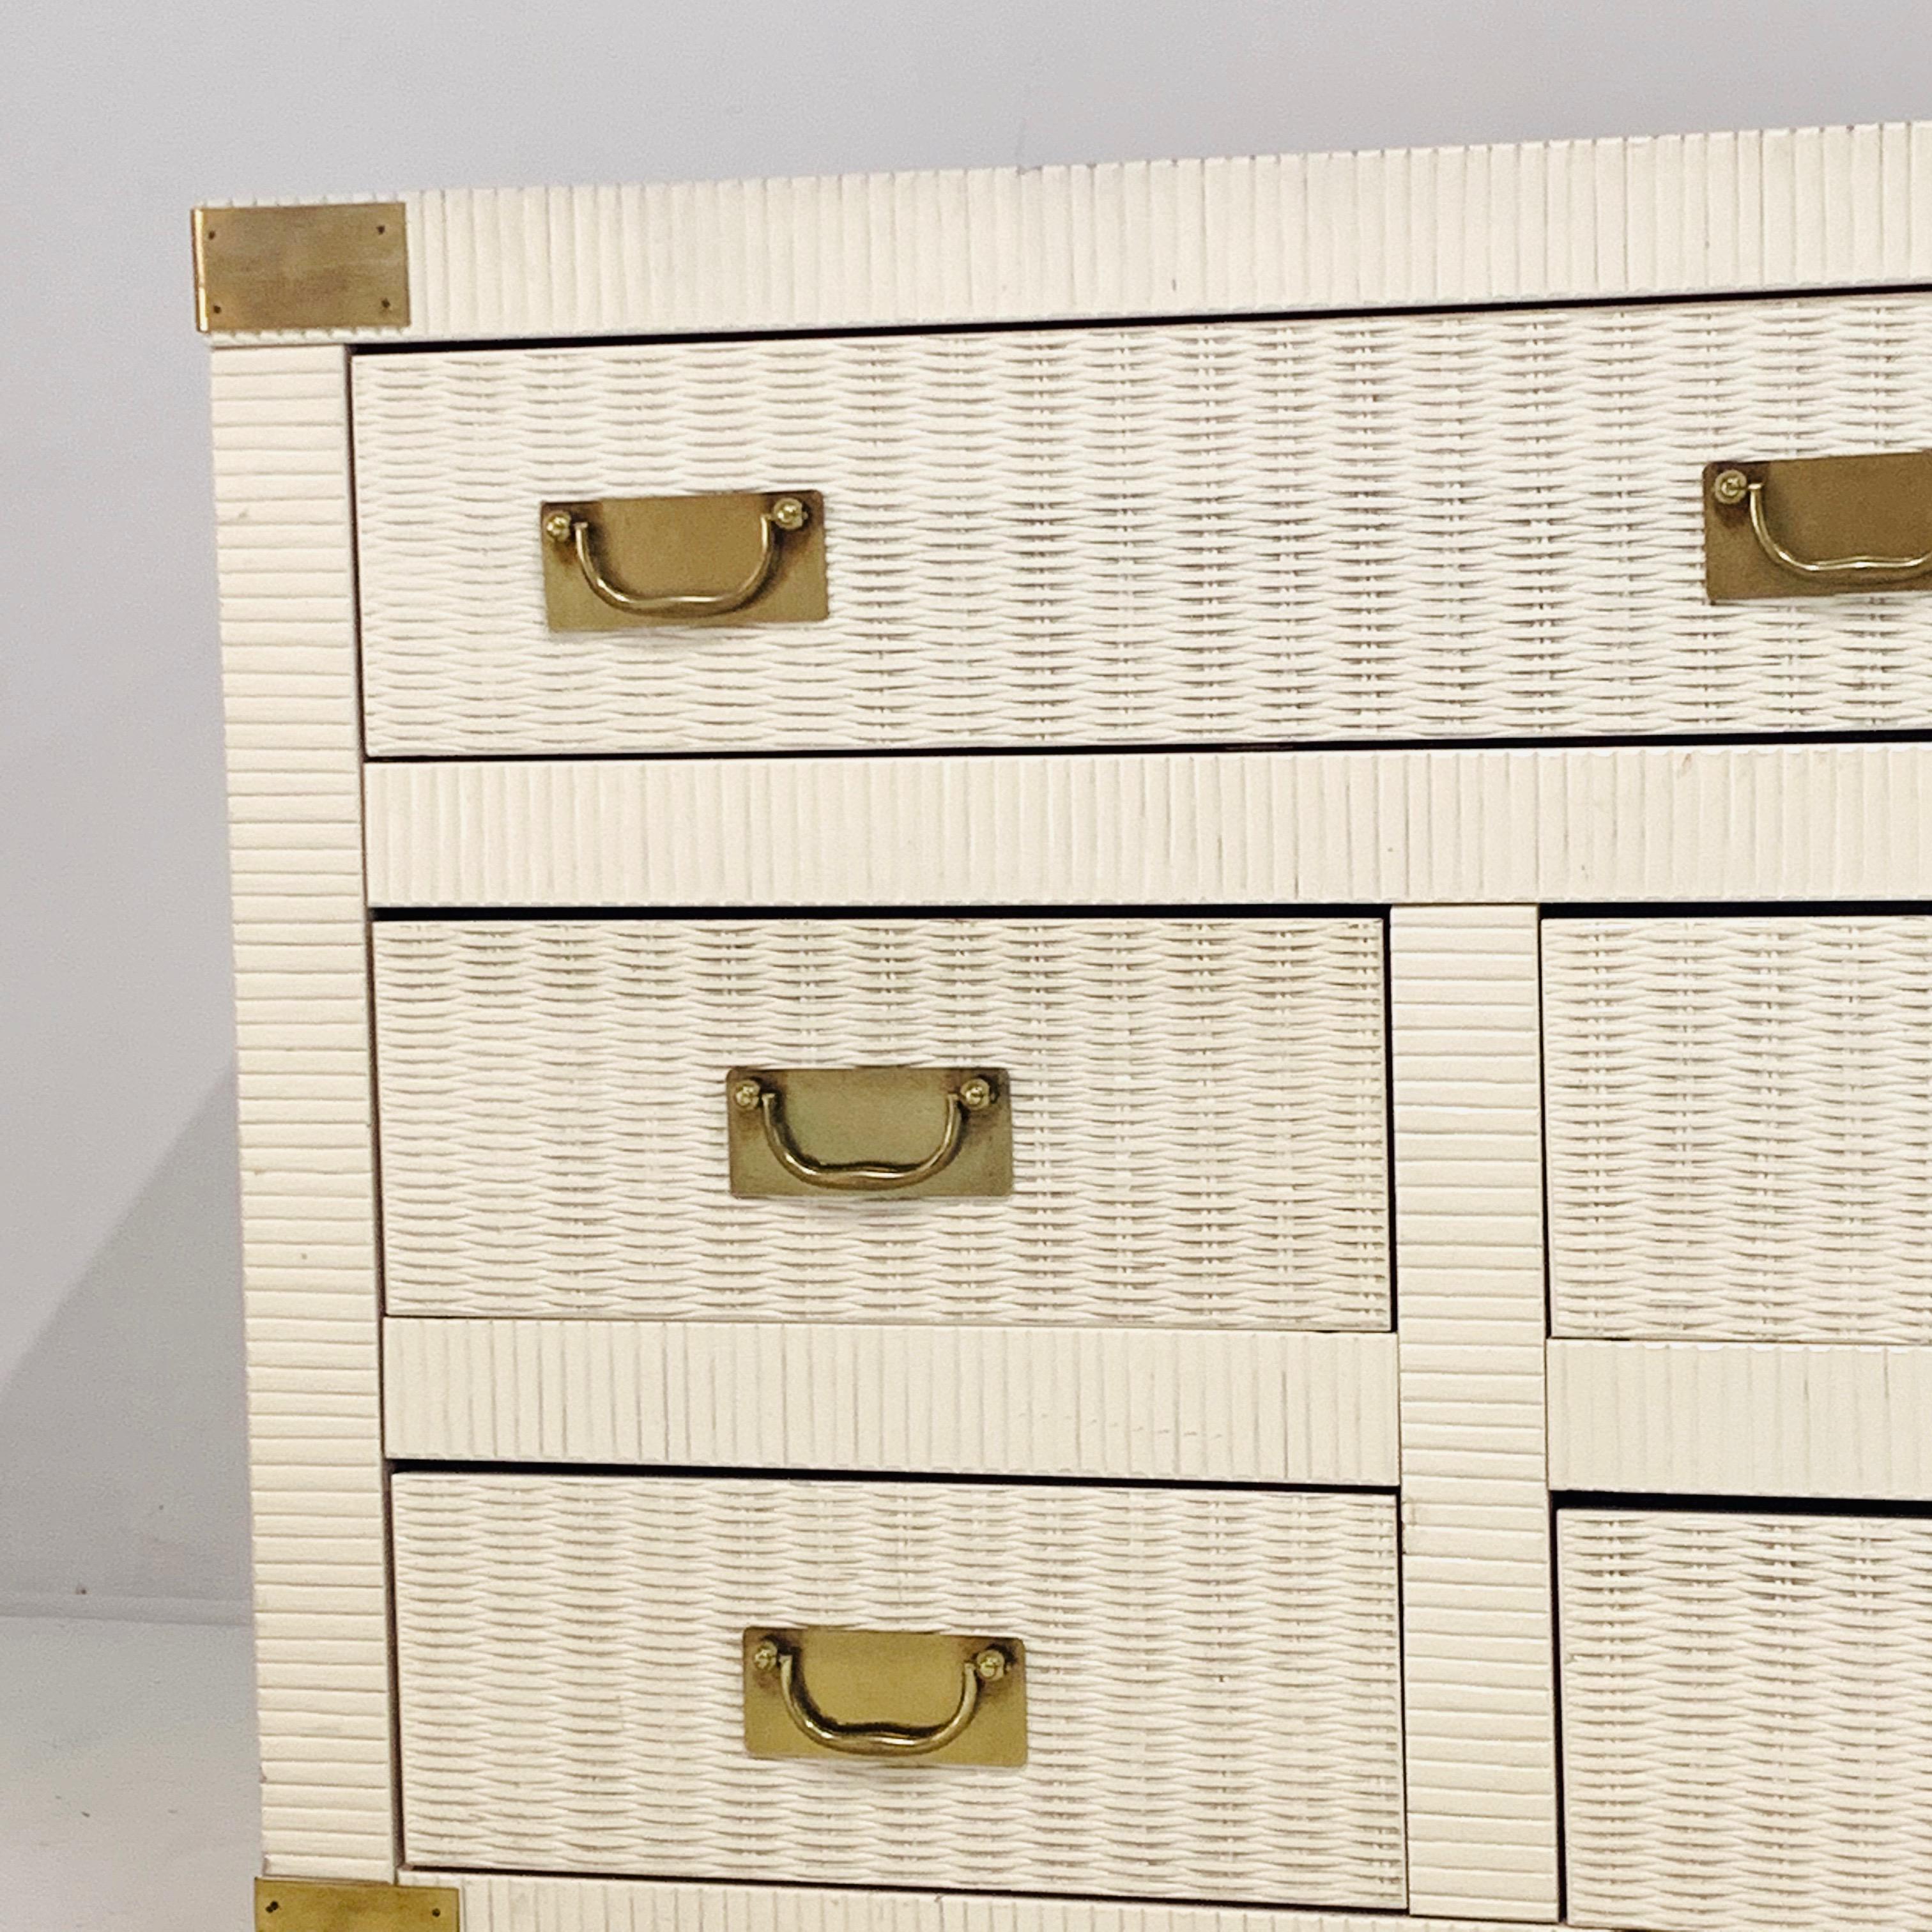 Lovely usable piece perfect for Palm Beach or Hollywood Regency setting. Drawer fronts are painted woven wicker. Sides of case are cream/ white lacquer and dresser top is usable mica so would be perfect for office or kids room.
  